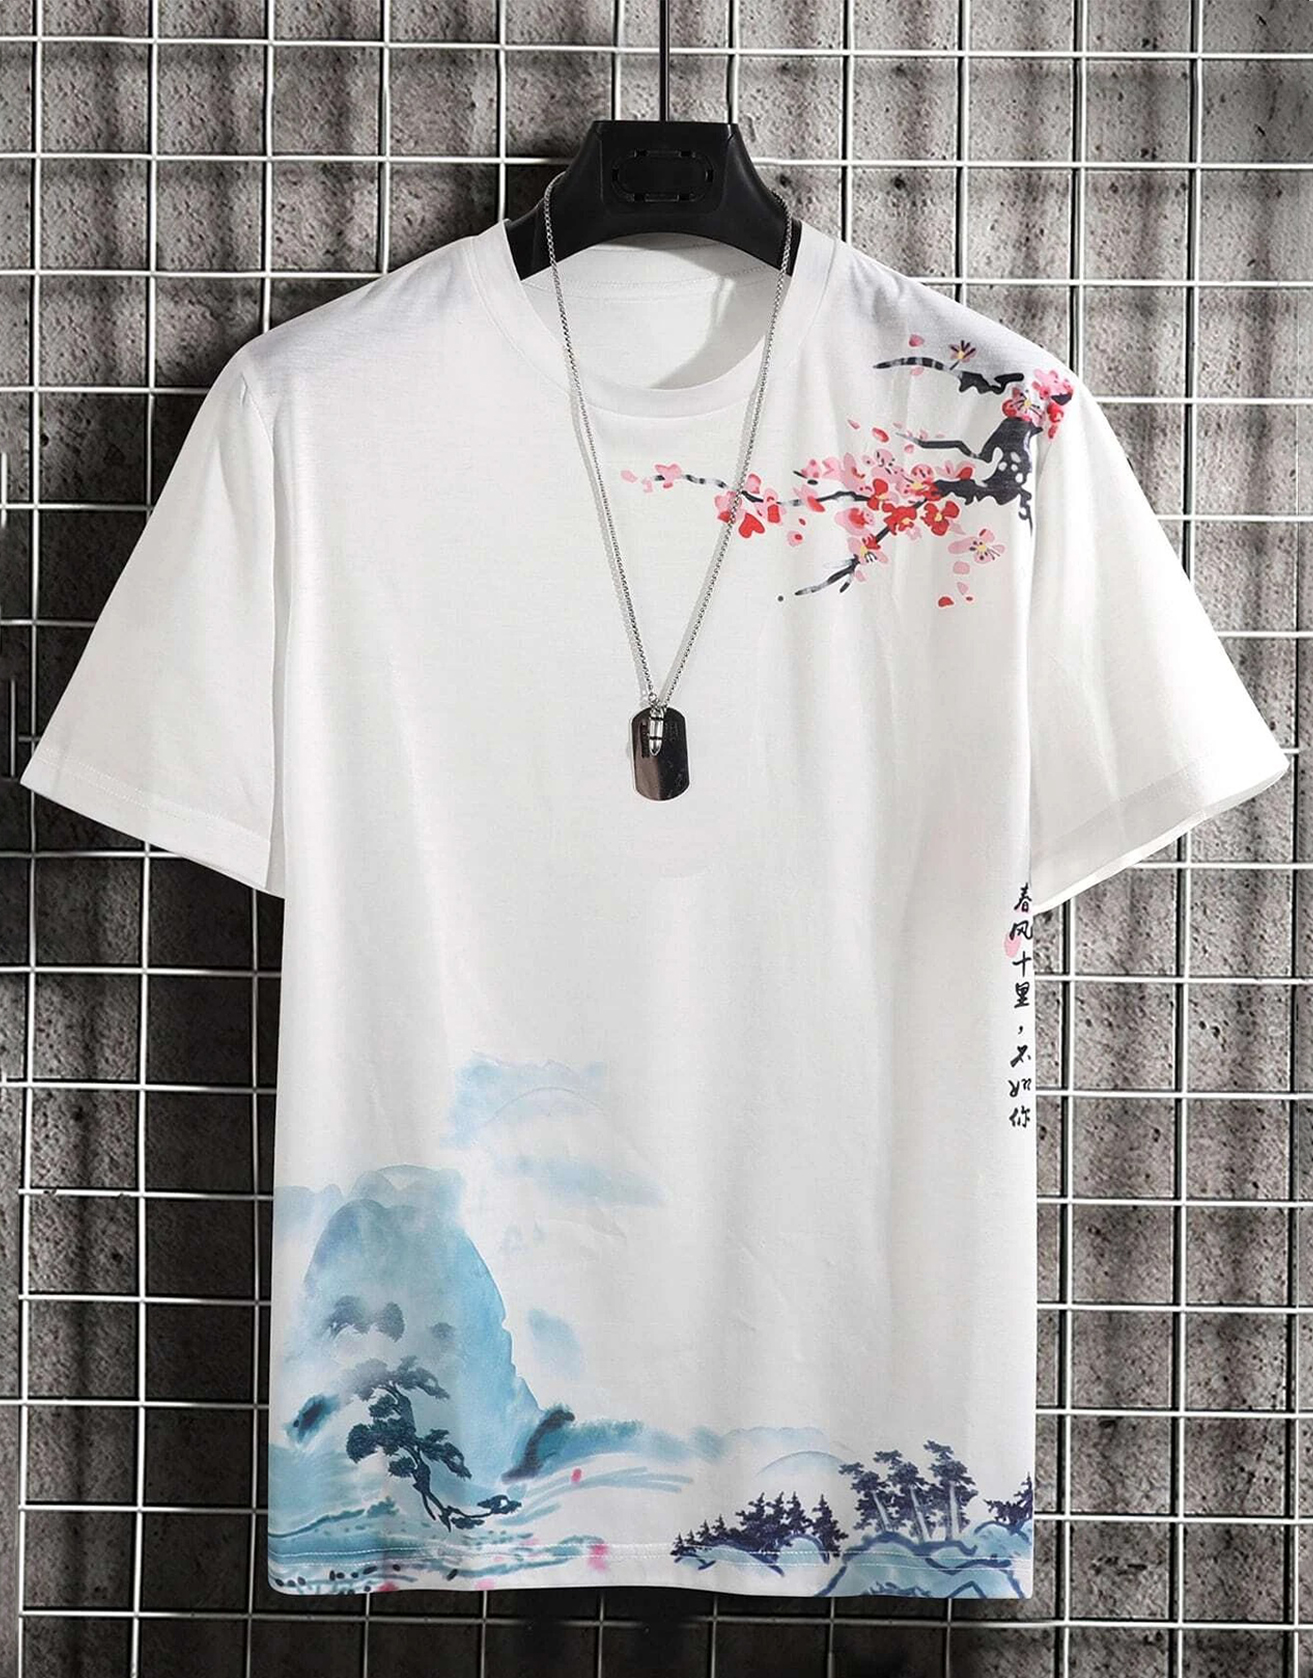 Manfinity Homme Men Floral & Chinese Letter Graphic Tee